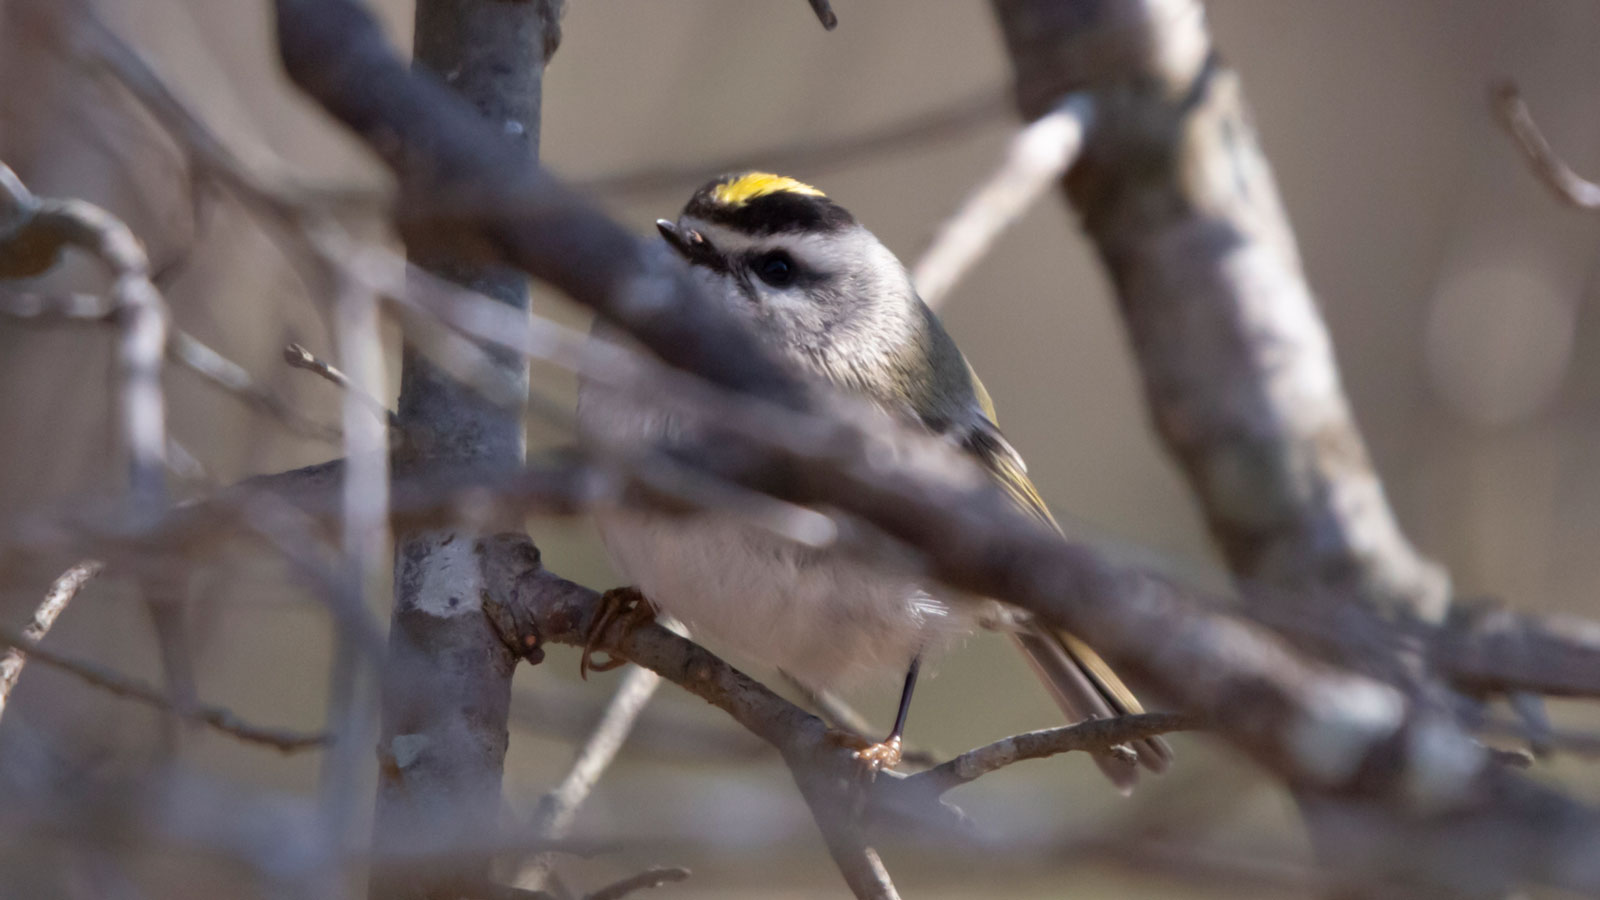 Golden-crowned kinglet hidden behind the bramble of bare branches